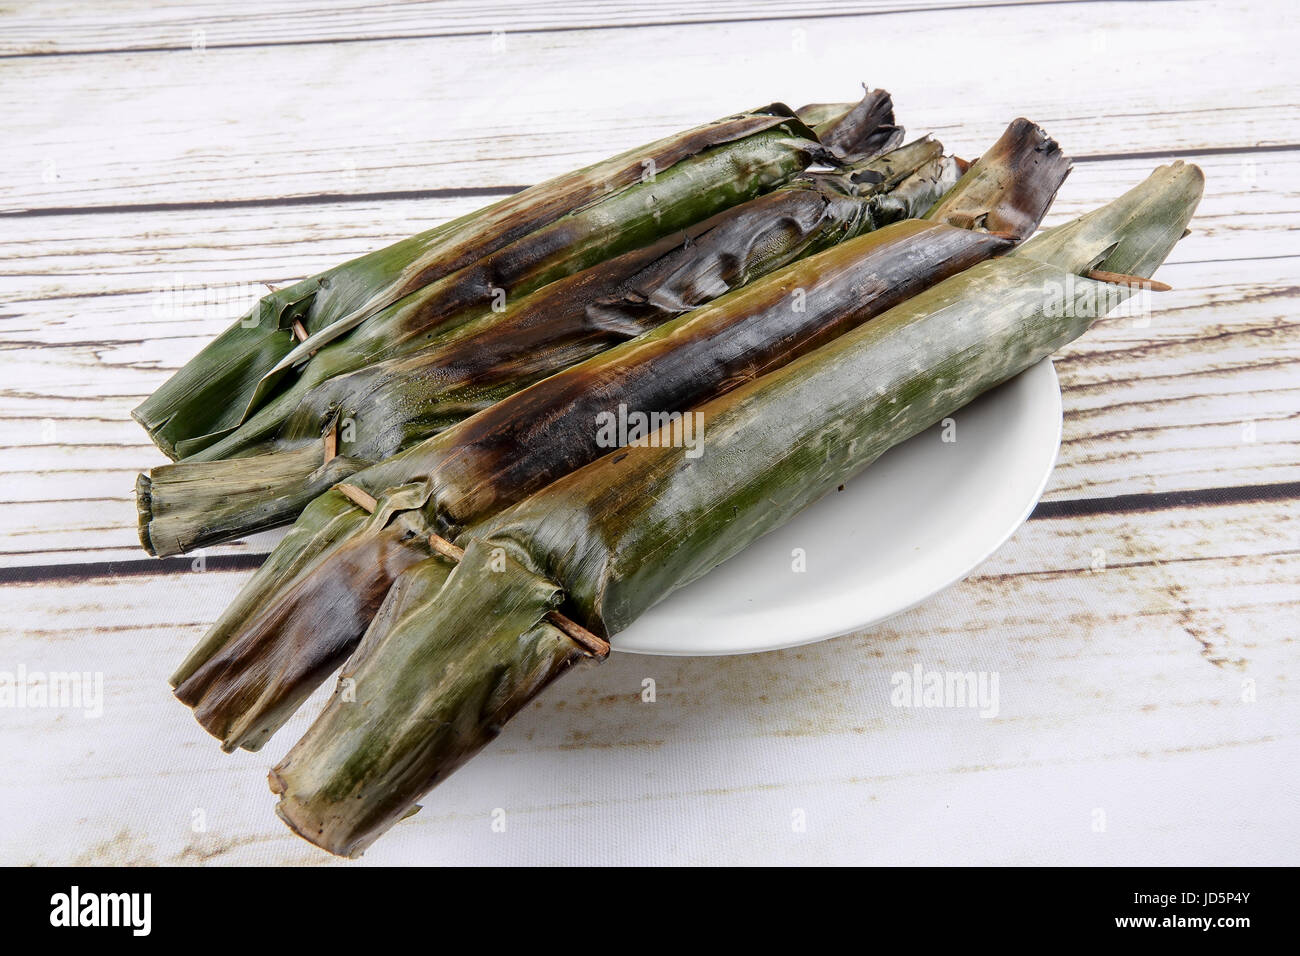 Pulut panggang or grilled glutinous rice package, Malay or Nonya cuisine most popular in Malaysia Stock Photo